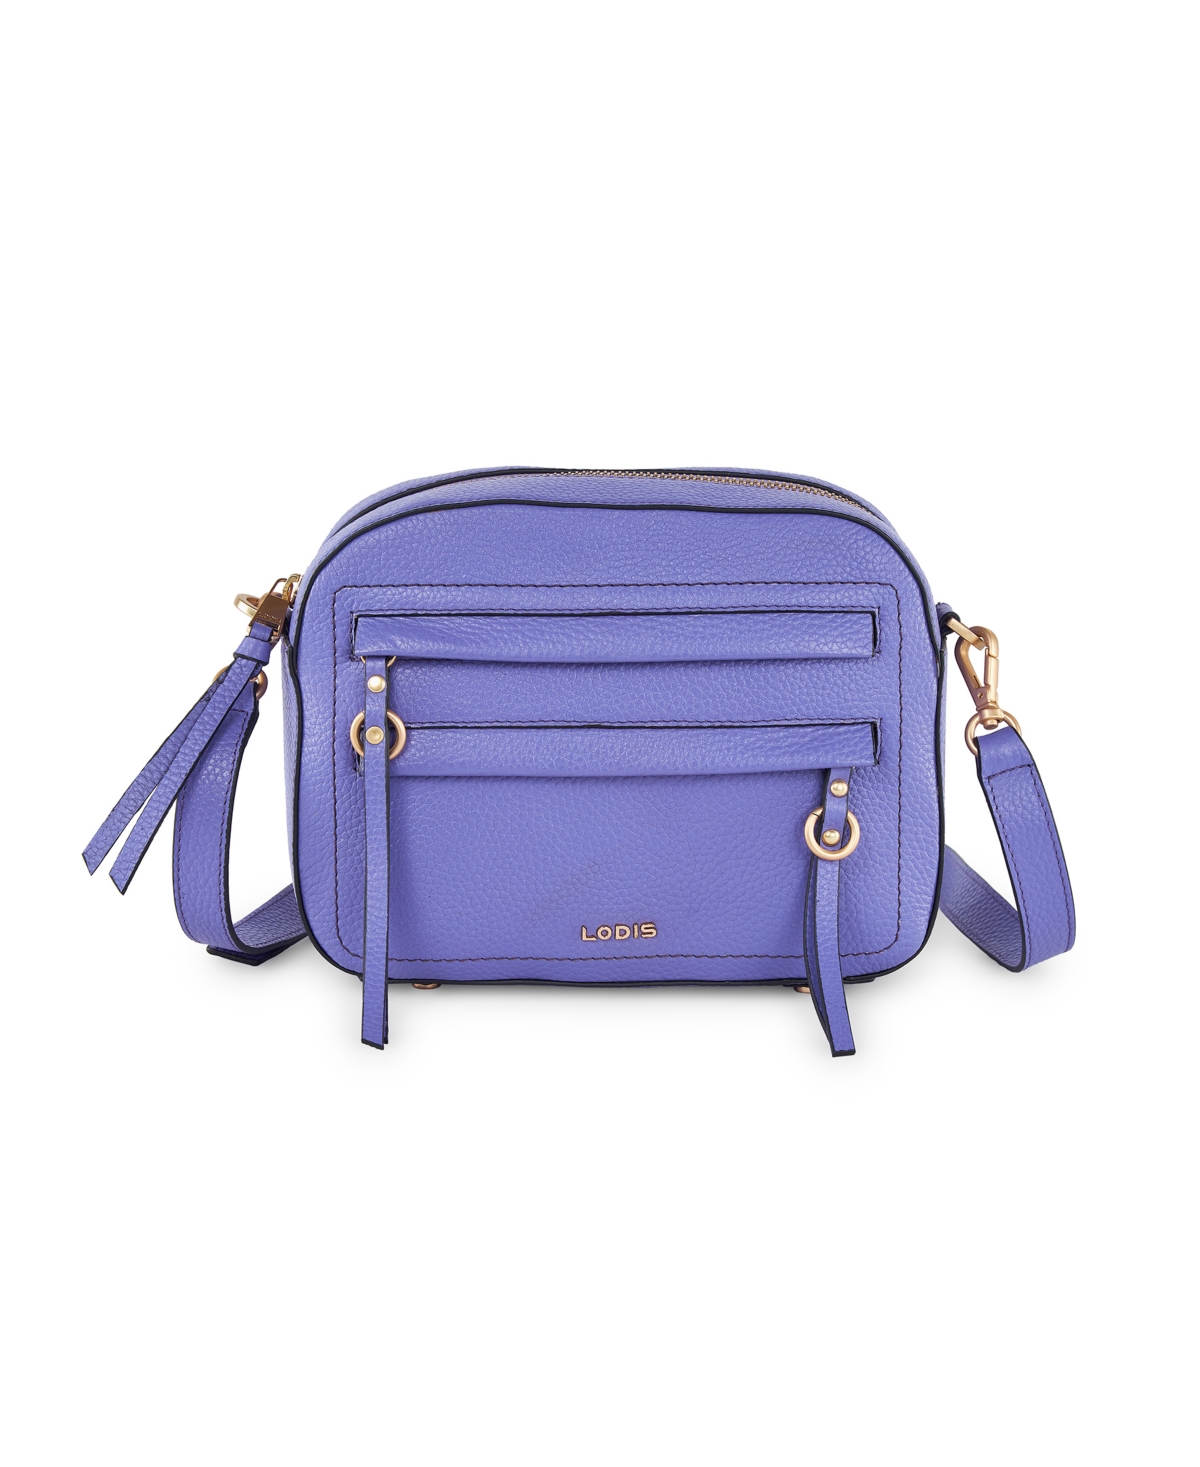 Lodis Women's Abby Camera Bag In Periwinkle